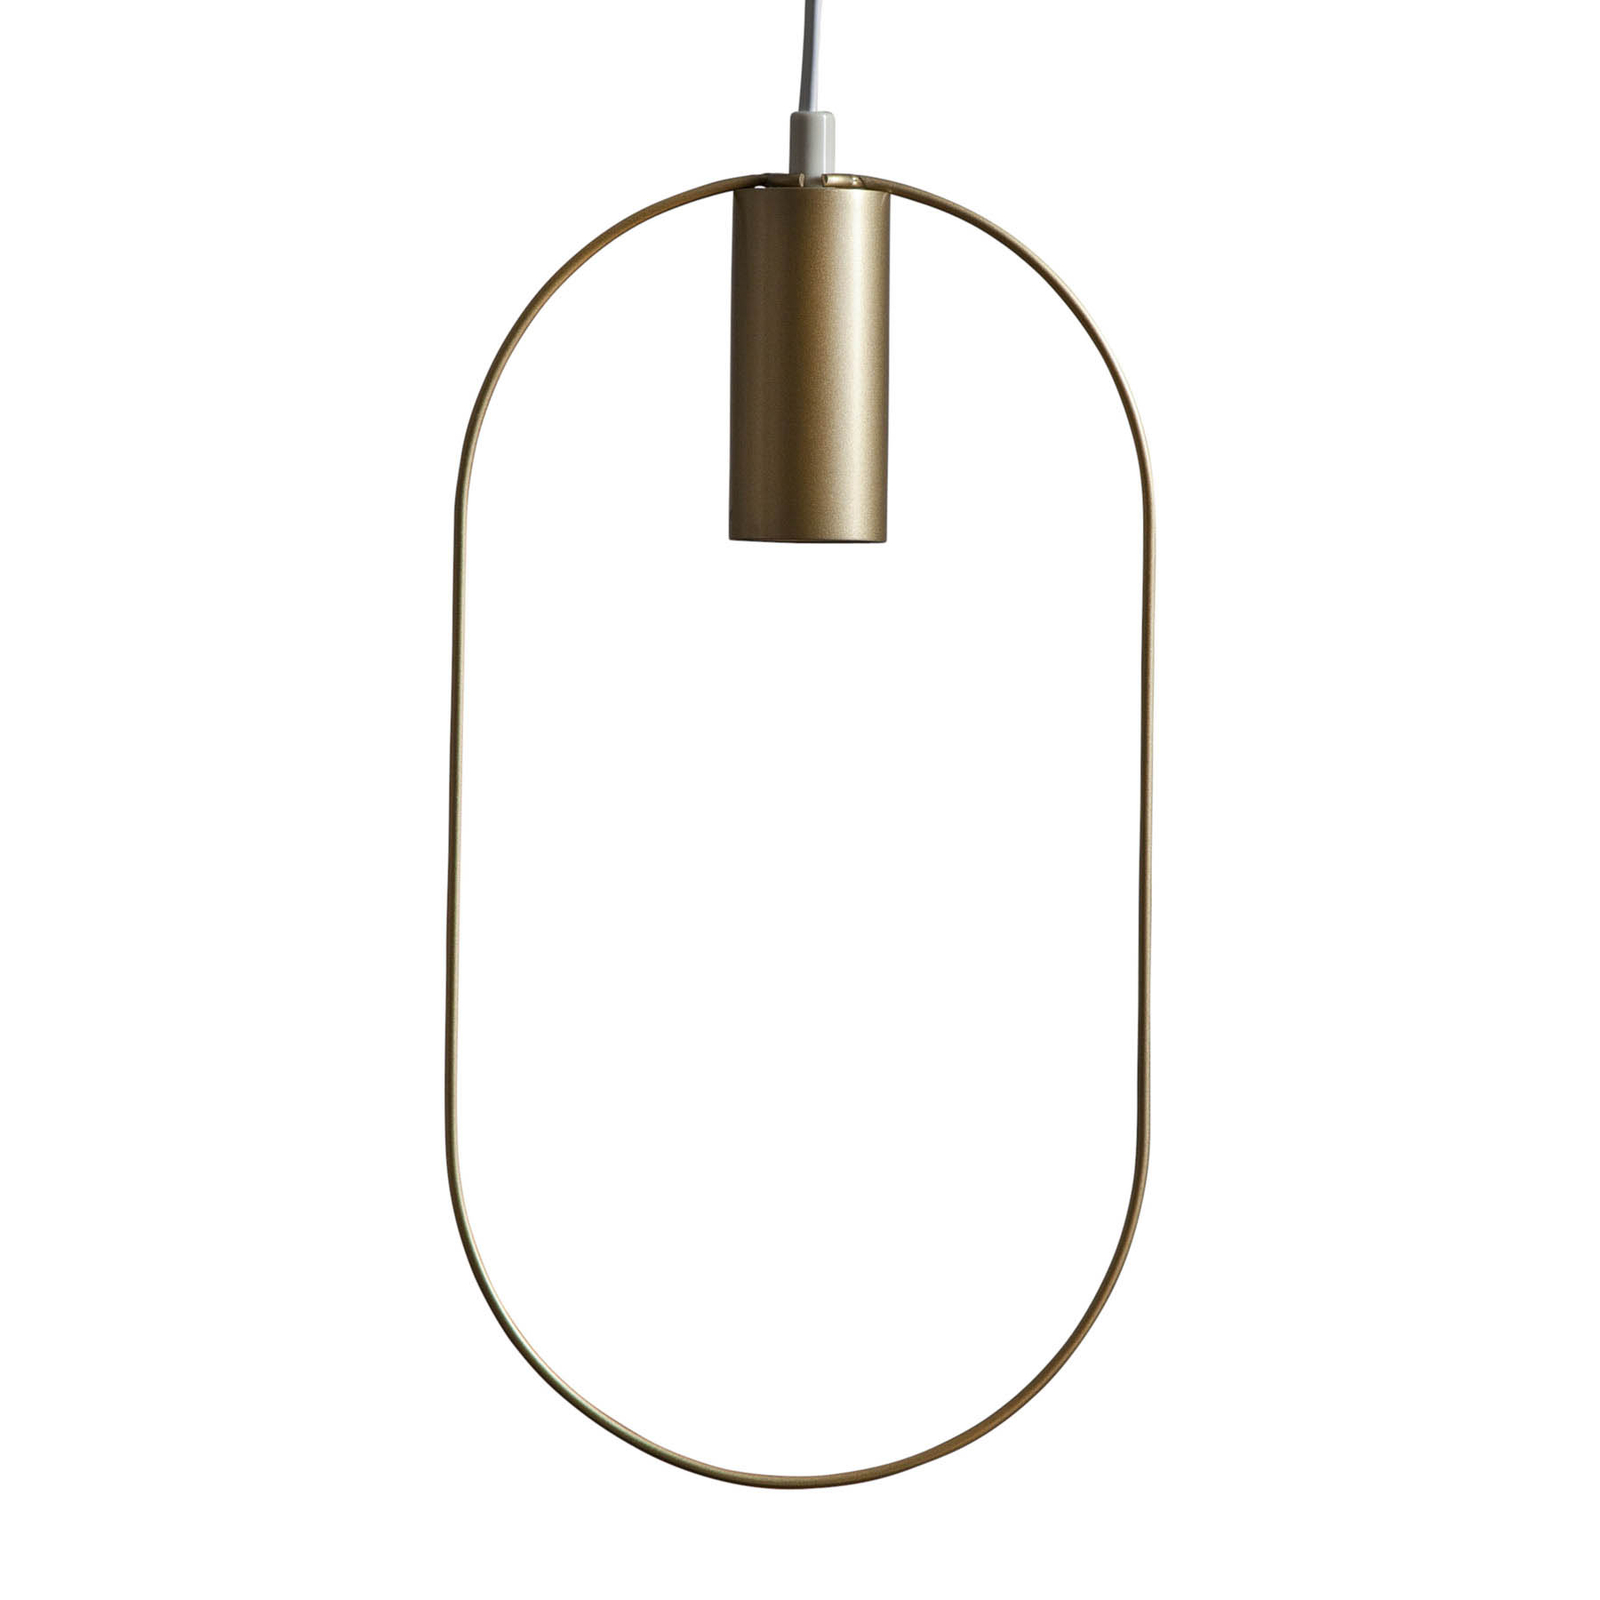 Shape decorative hanging light with oval, gold